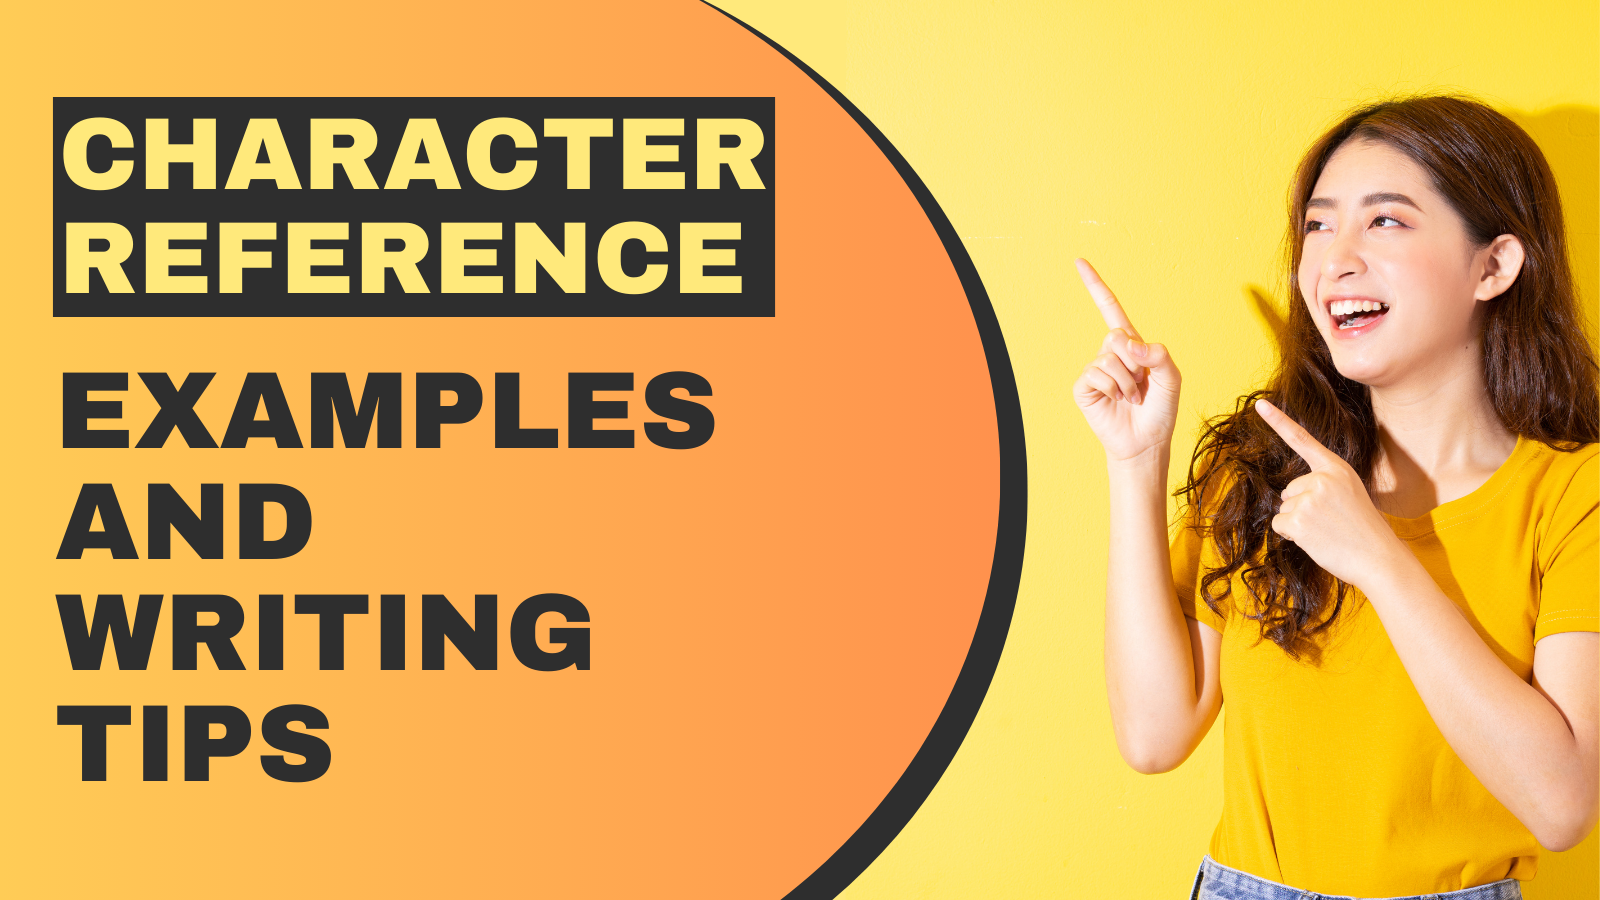 Character Reference Examples and Writing Tips